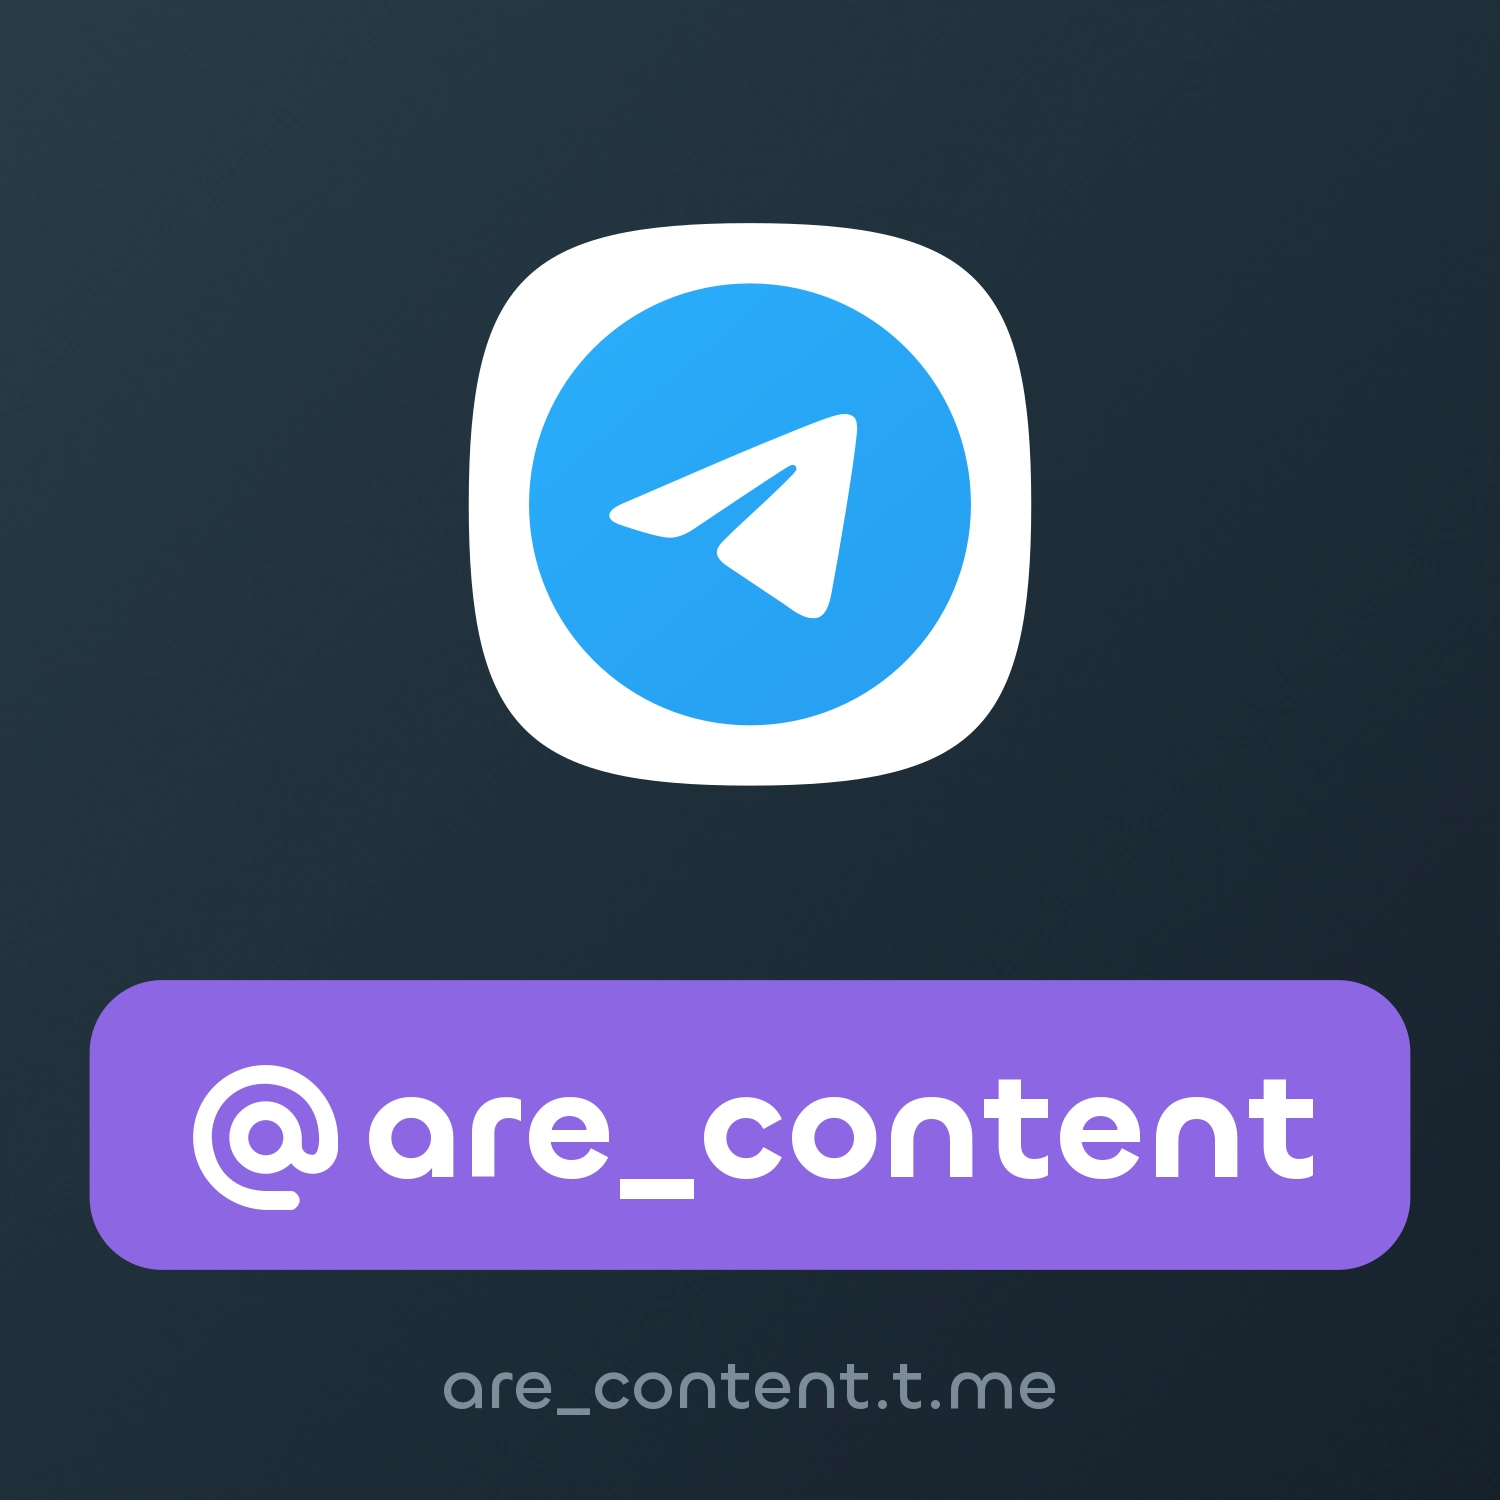 @are_content